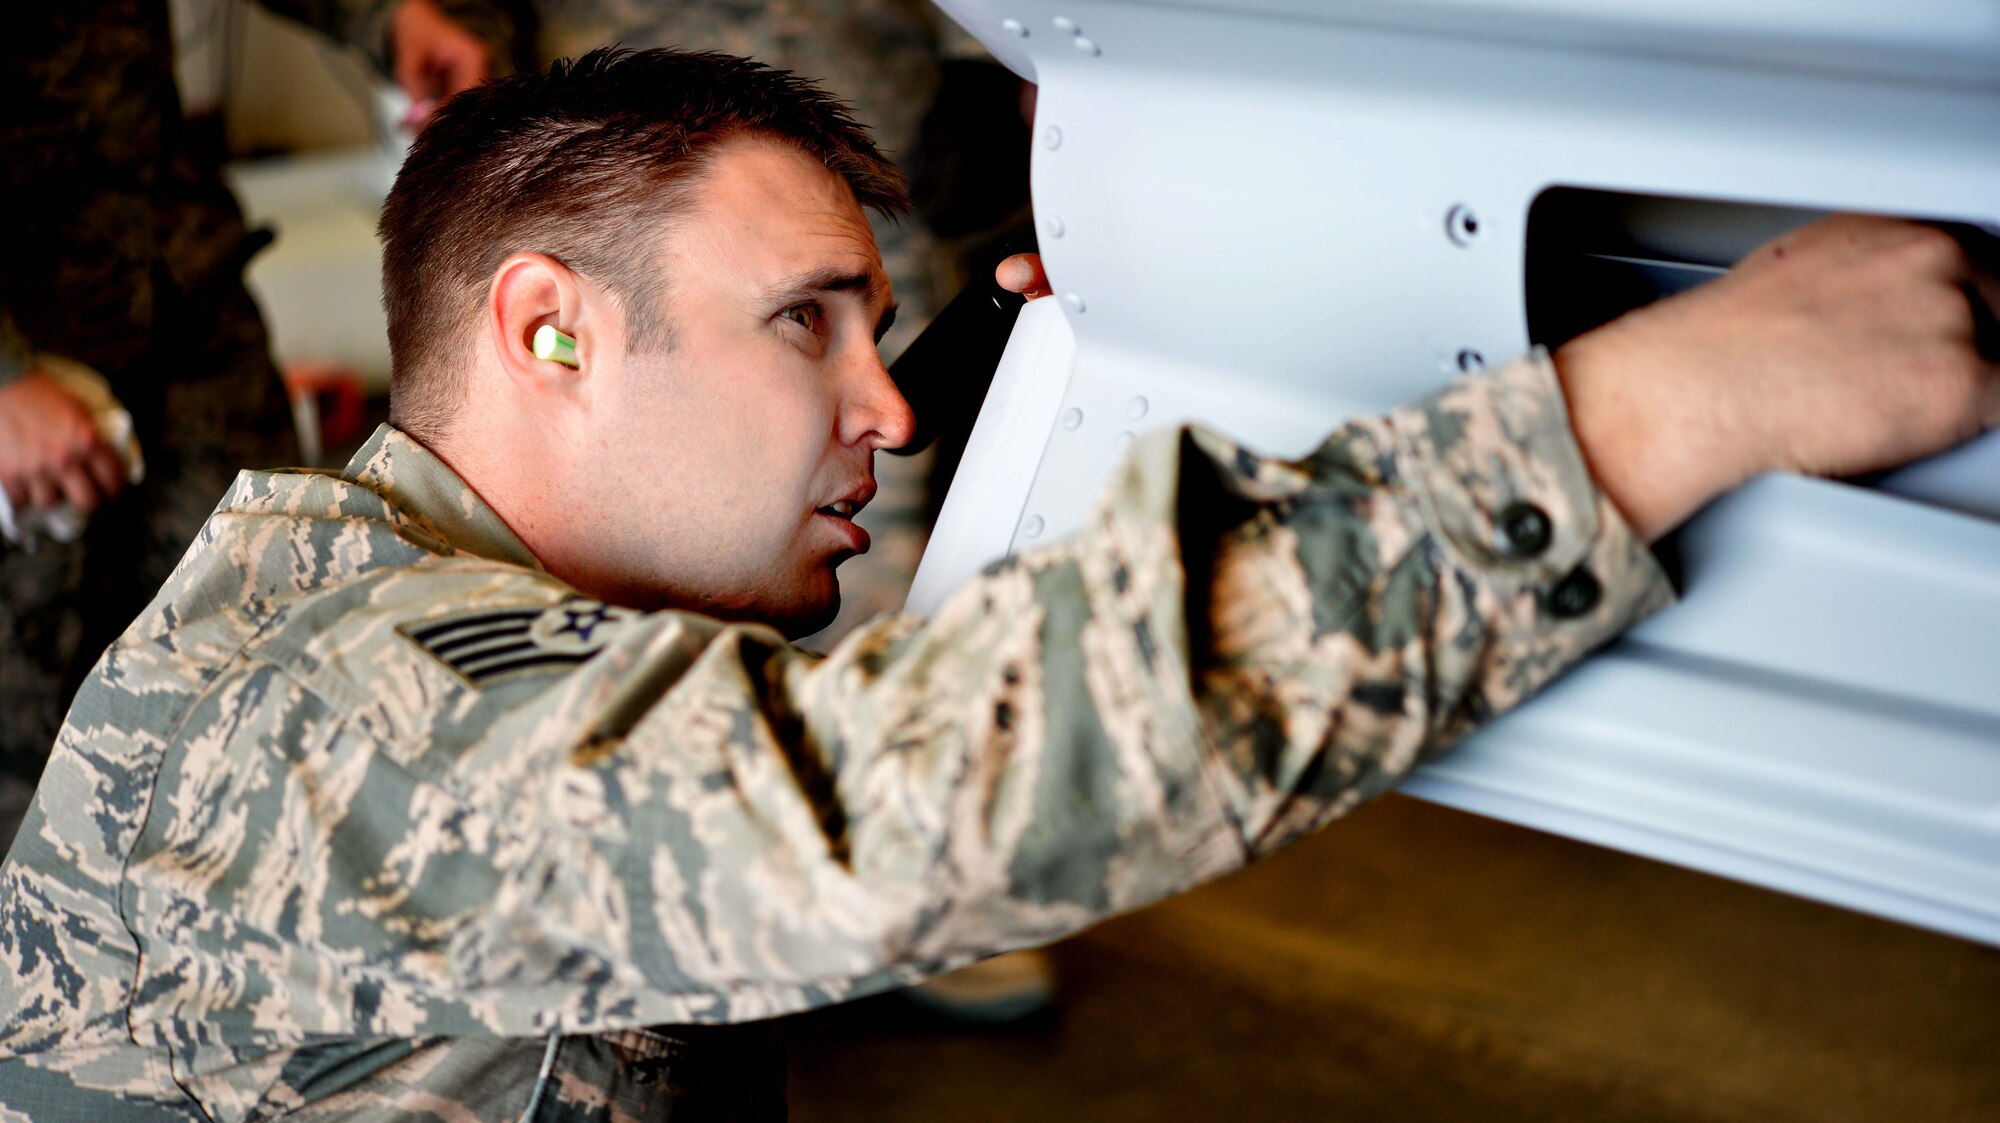 Staff Sgt. Anthony, 432nd Maintenance Squadron munitions flight crew chief, inspects an inert GBU-12 Paveway ll laser-guided bomb April 27, 2016, at Creech Air Force Base, Nevada. Anthony, NCO in-charge of the six GBU-12 munitions build, explained technical orders to Col. Case Cunningham, 432nd Wing/432nd Air Expeditionary Wing commander, and Chief Master Sgt. Michael Ditore, 432nd Wg/432nd AEW command chief. Cunningham and Ditore assisted the Airmen with building the bombs and learned how ammo Airmen supply weapons to the MQ-1 and MQ-9 aircraft on base. (U.S. Air Force photo by Airman 1st Class Kristan Campbell/Released).